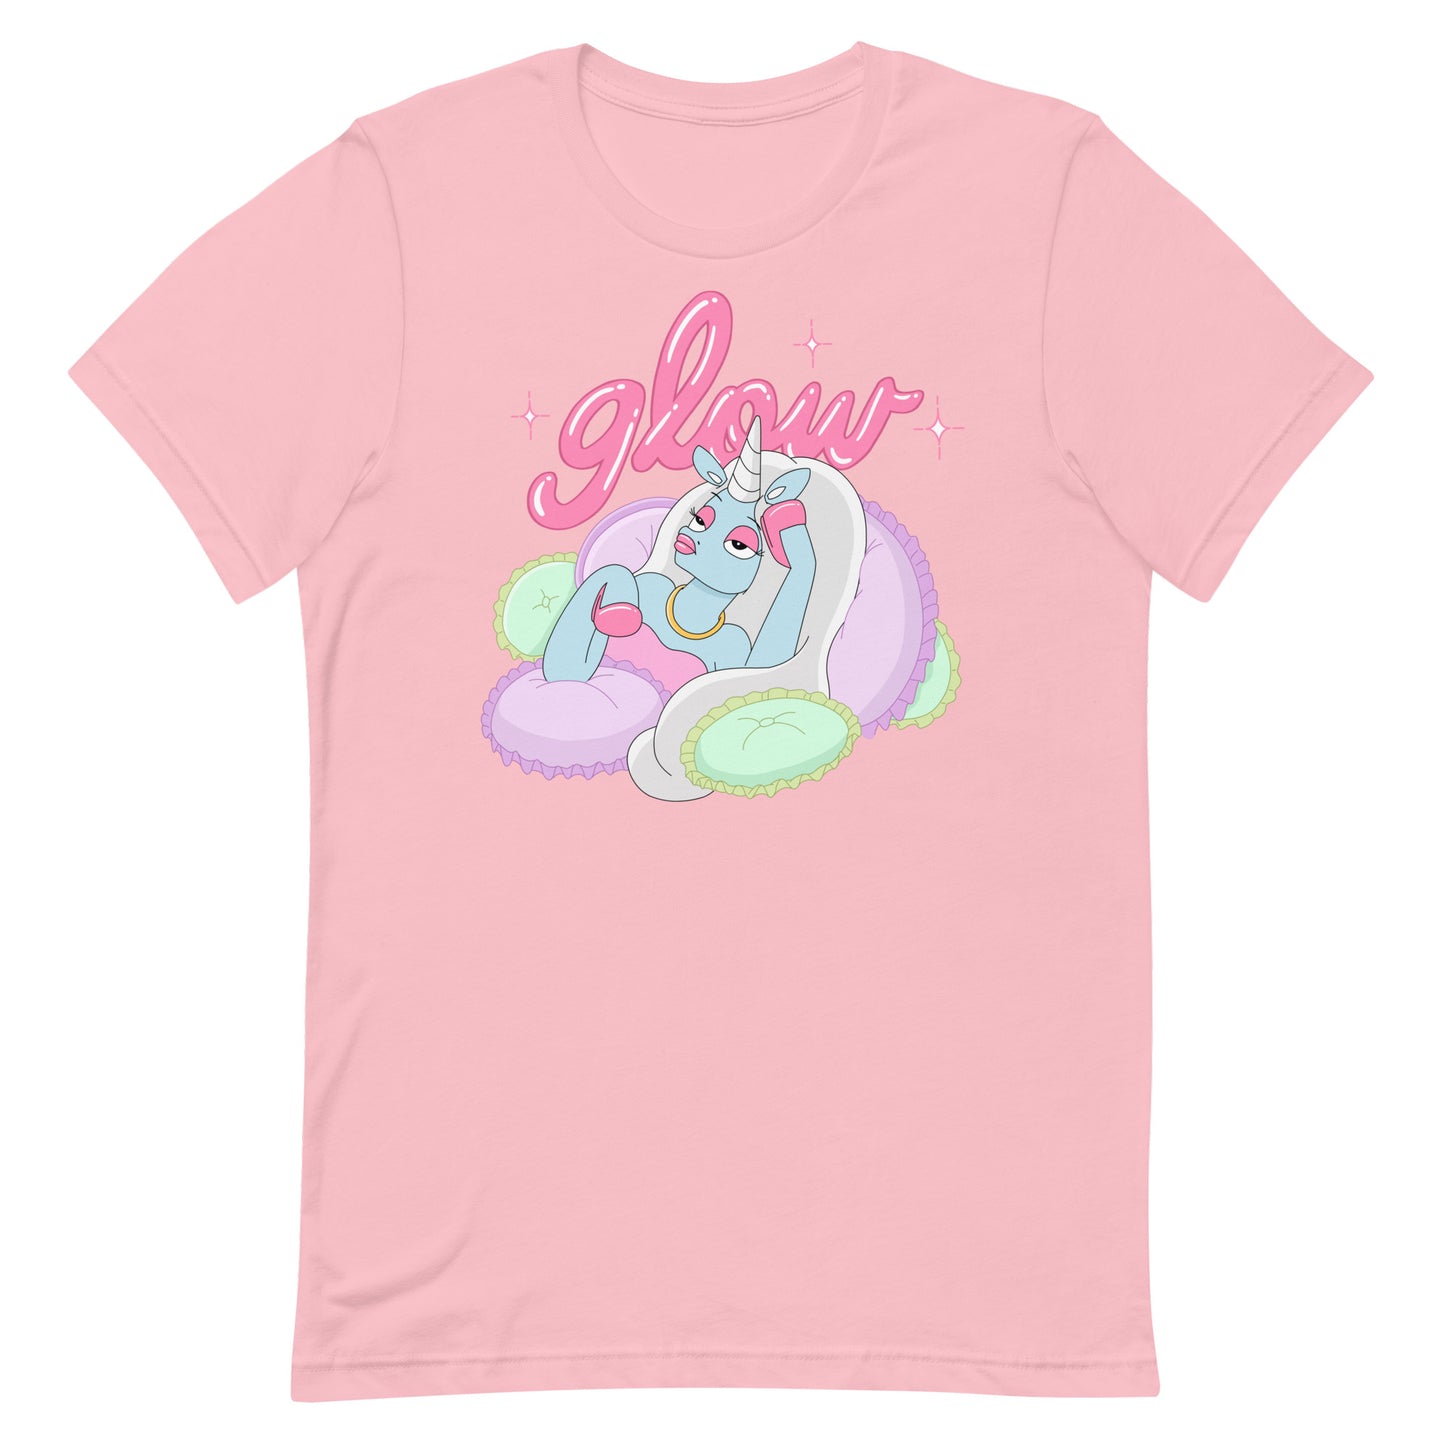 pink tee shirt with glowtheunicorn being chill